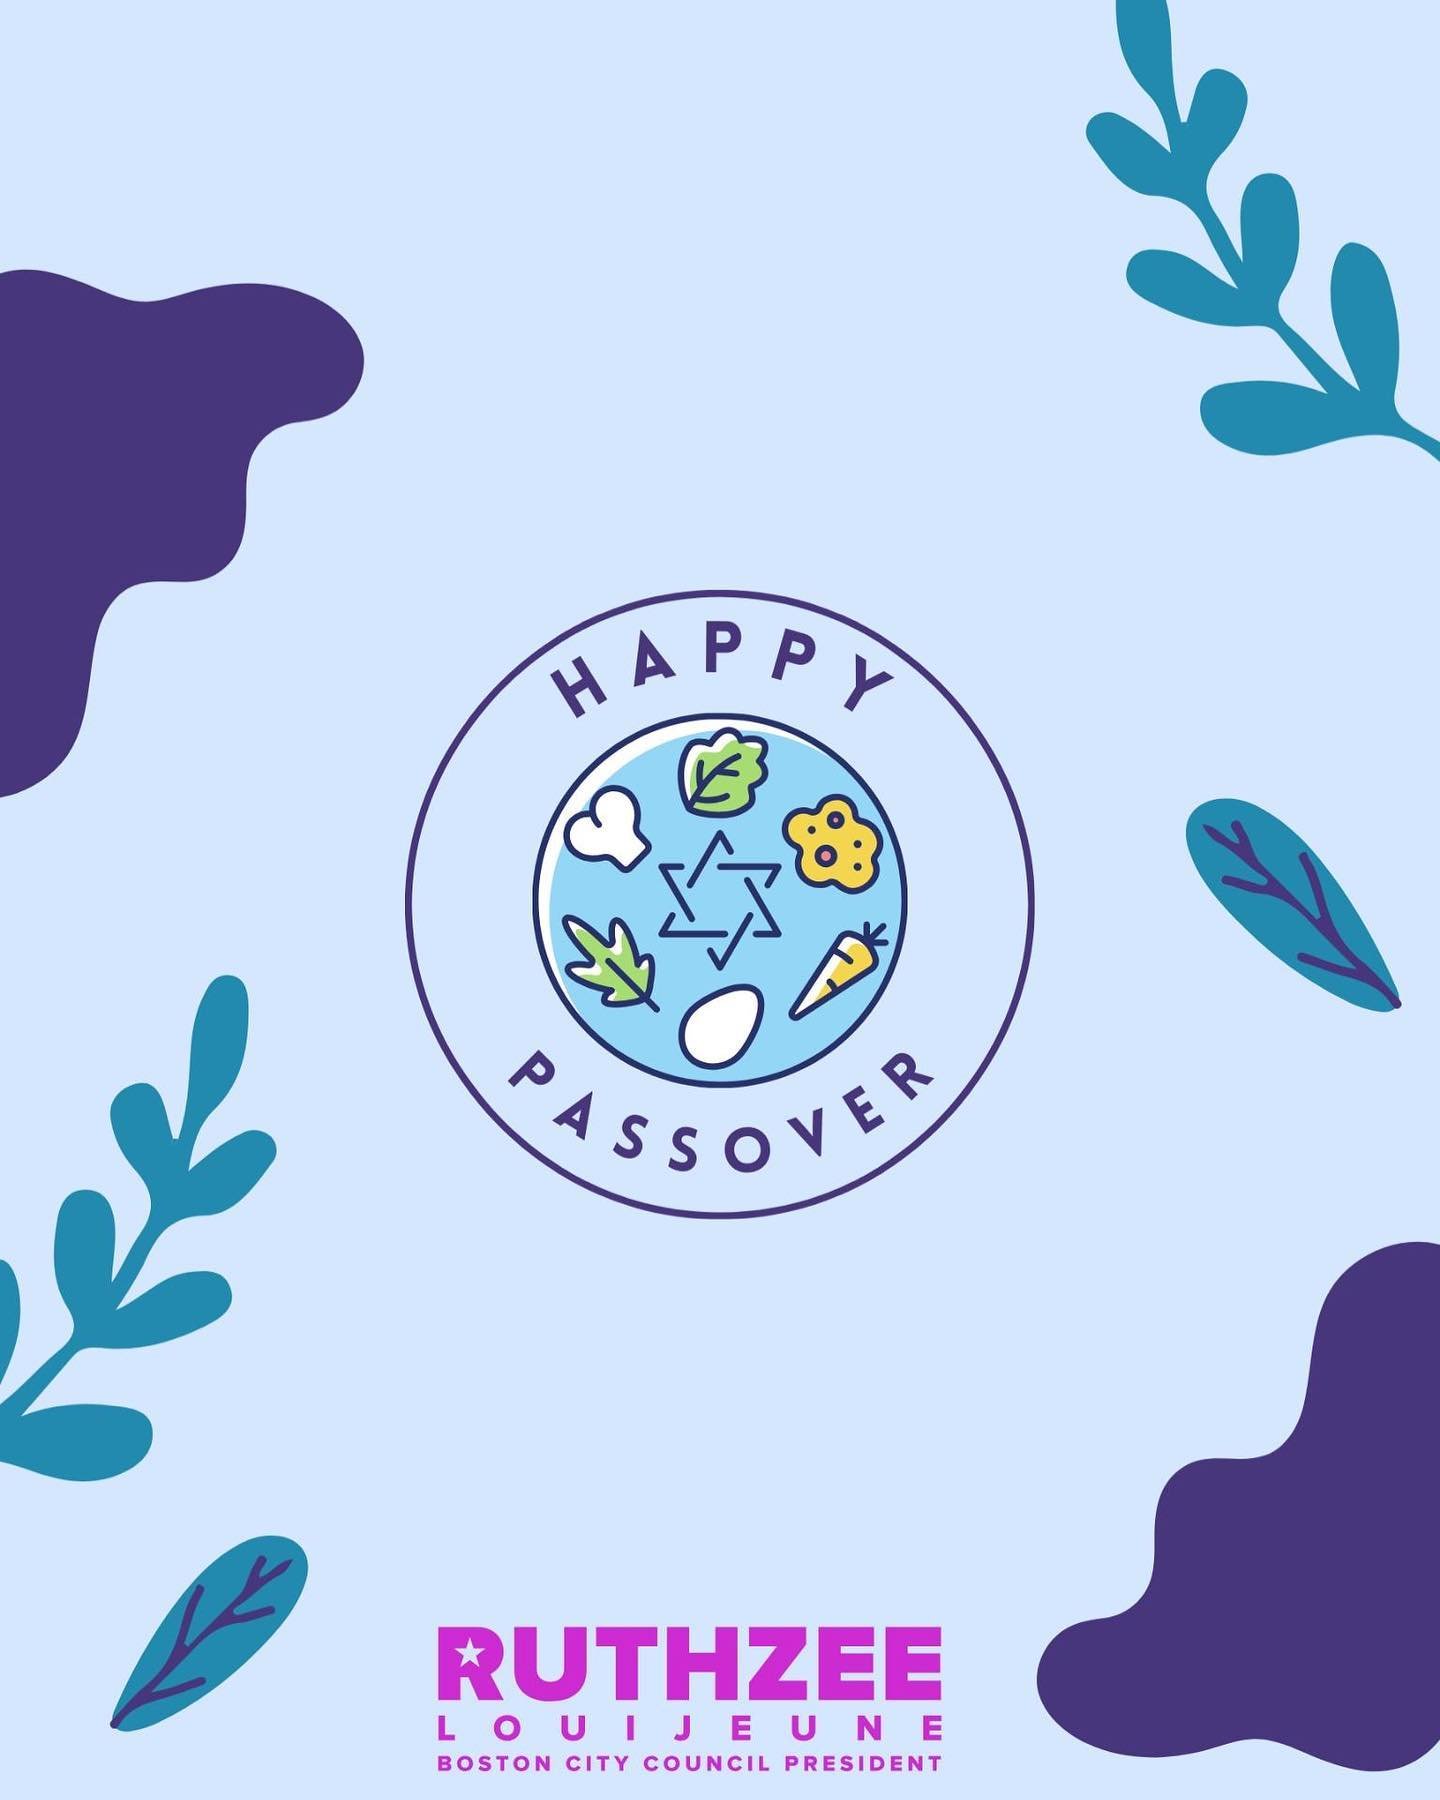 Happy #passover, Boston! Wishing everyone celebrating a joyous and meaningful holiday filled with love, and cherished moments with family and friends! Chag Pesach Sameach!